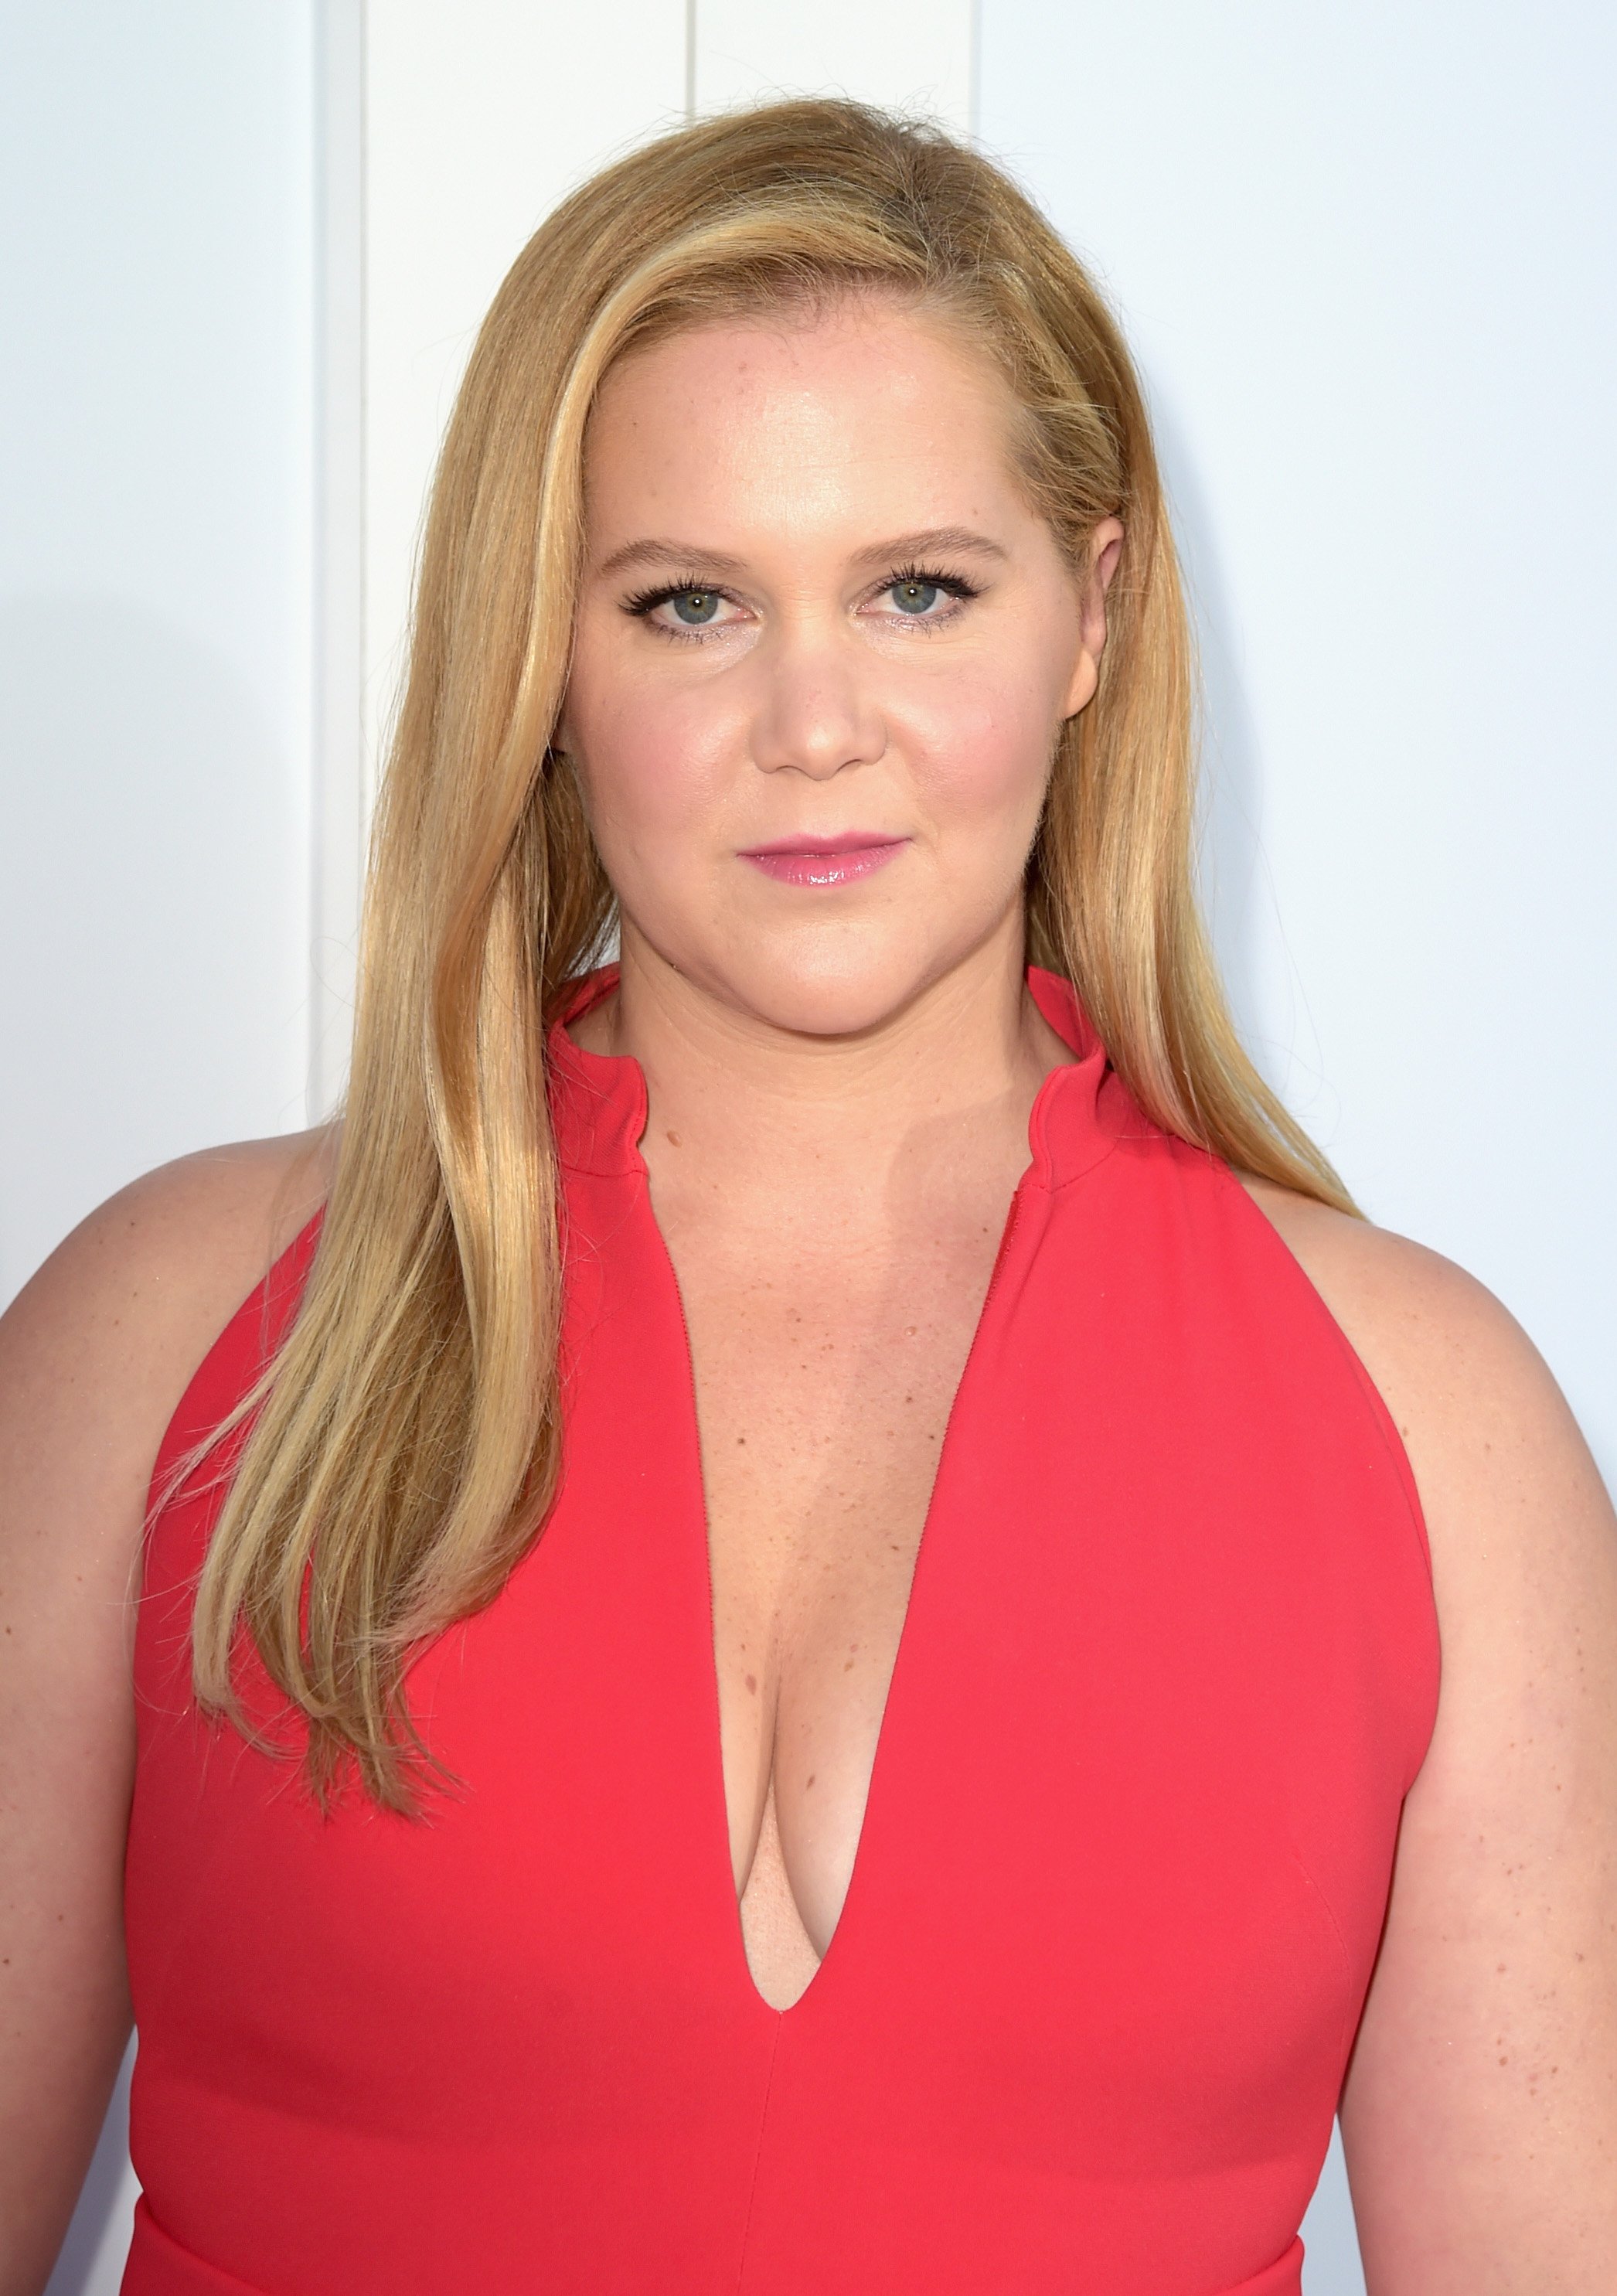 Amy Schumer leads her docuseries "Expecting Amy" that shows the realities of her pregnancy and marriage. | Photo: Getty Images